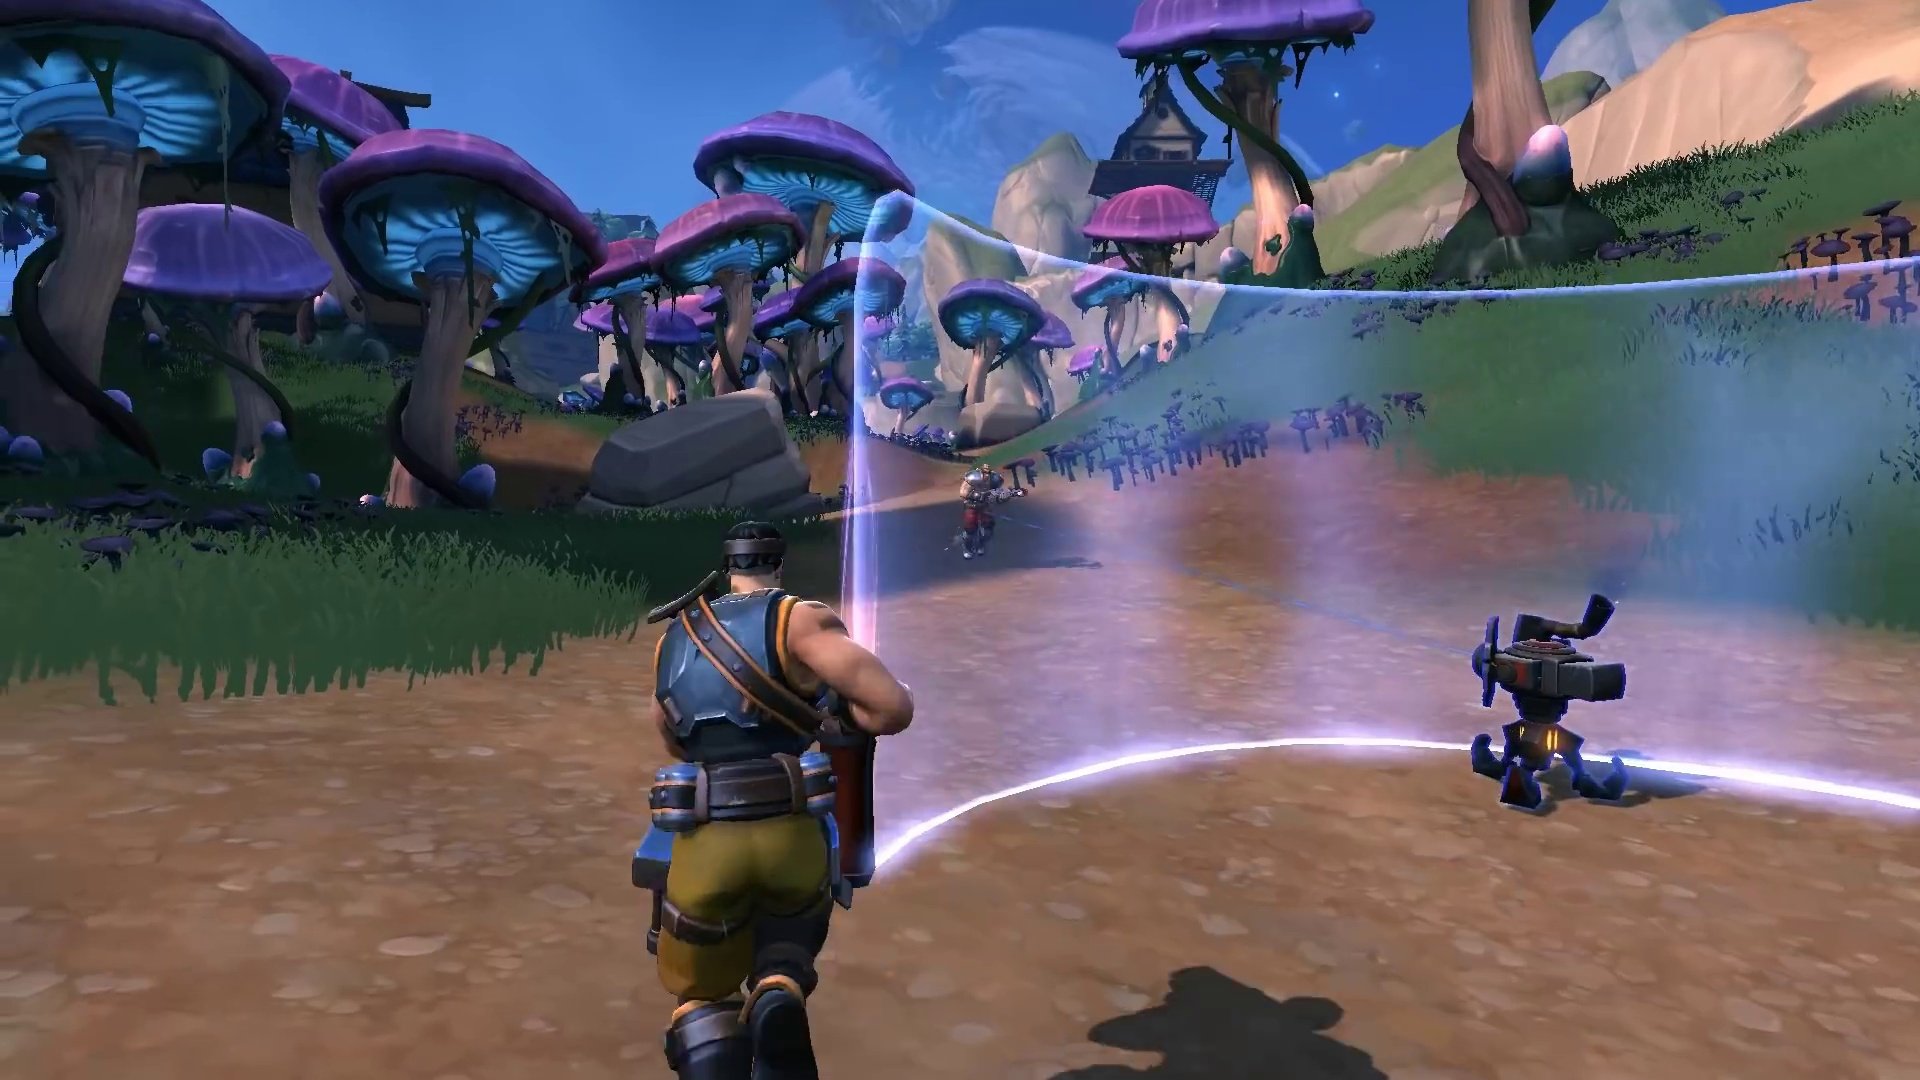 cross play between xbox one and nintendo switch coming to paladins realm royale smite - how to play fortnite with friends on switch